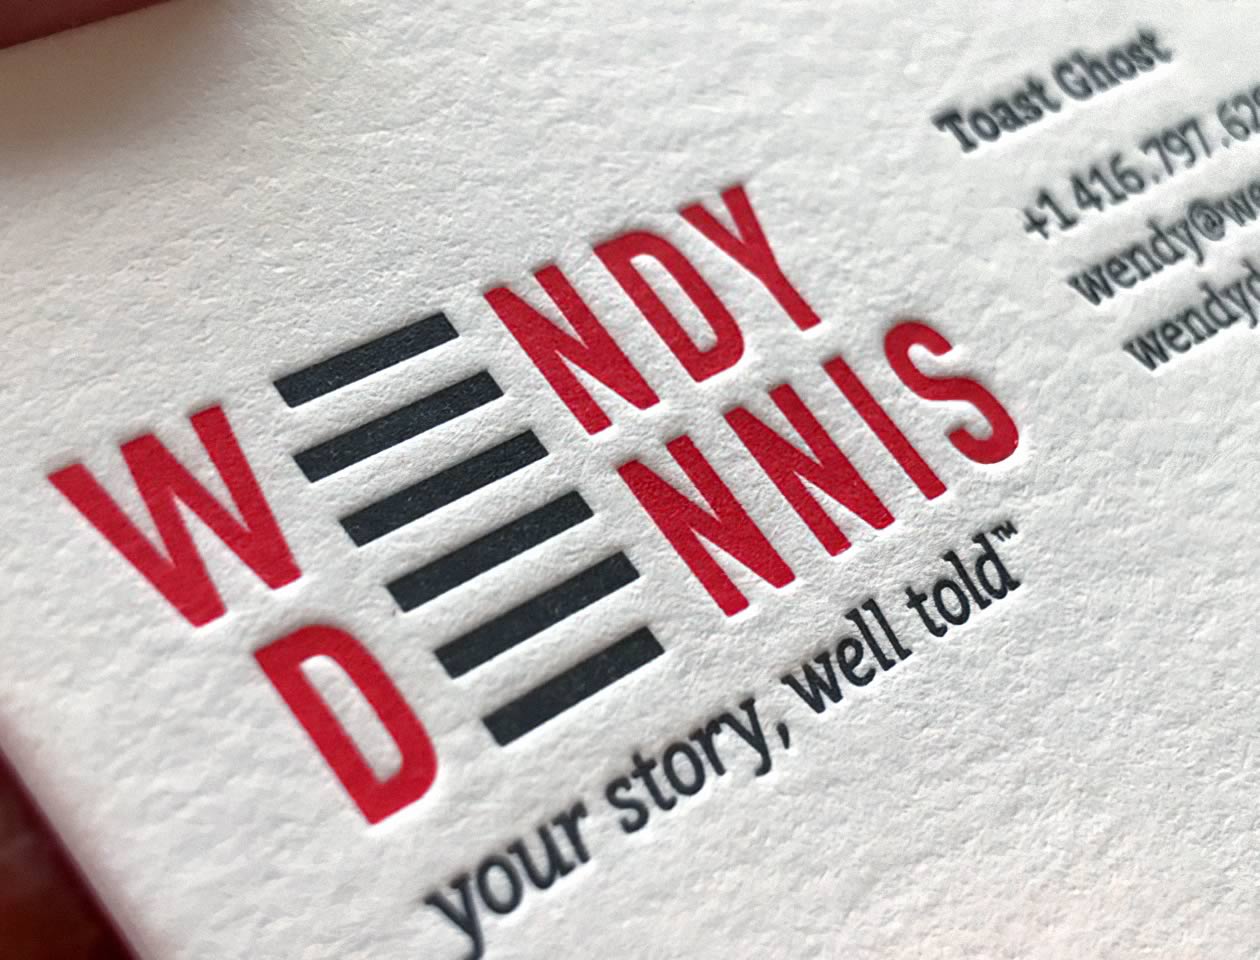 Photograph of Wendy Dennis’ business card